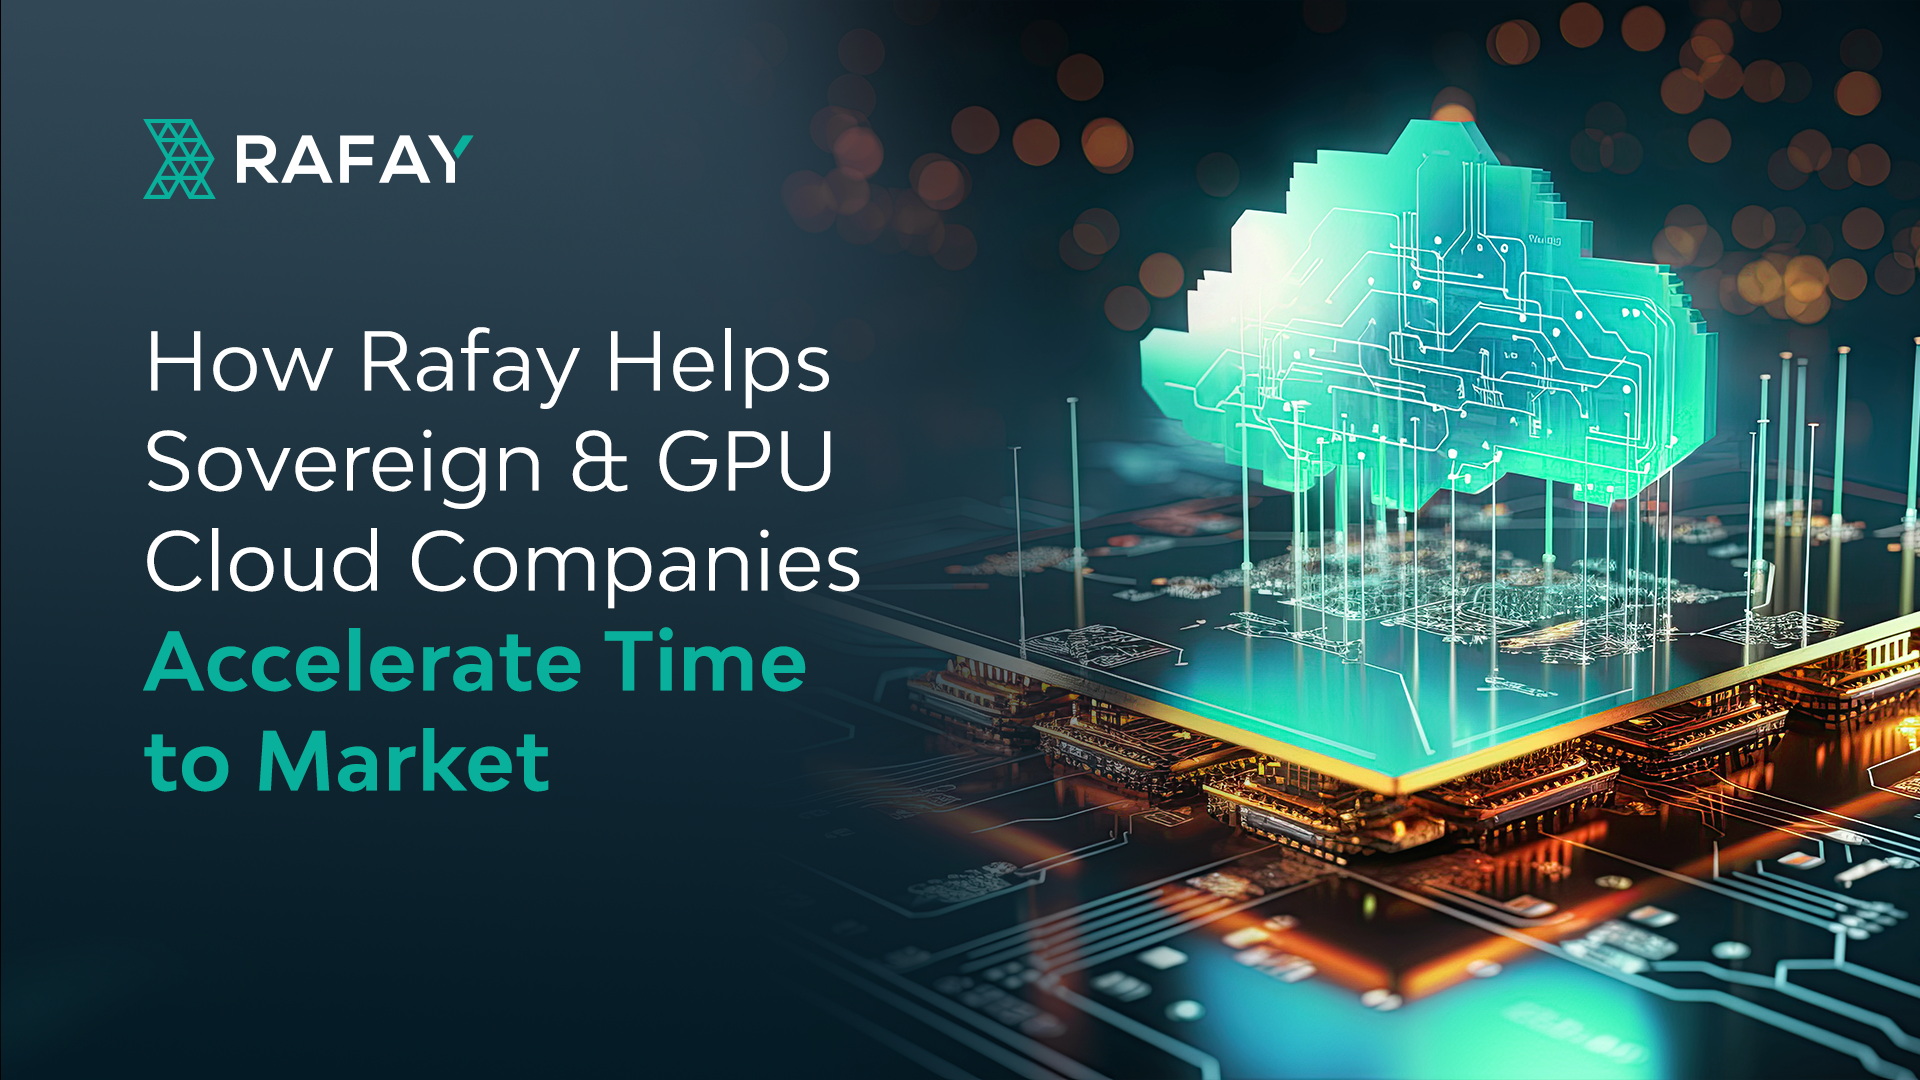 Image for How Rafay Helps Sovereign & GPU Cloud Companies Accelerate Time to Market